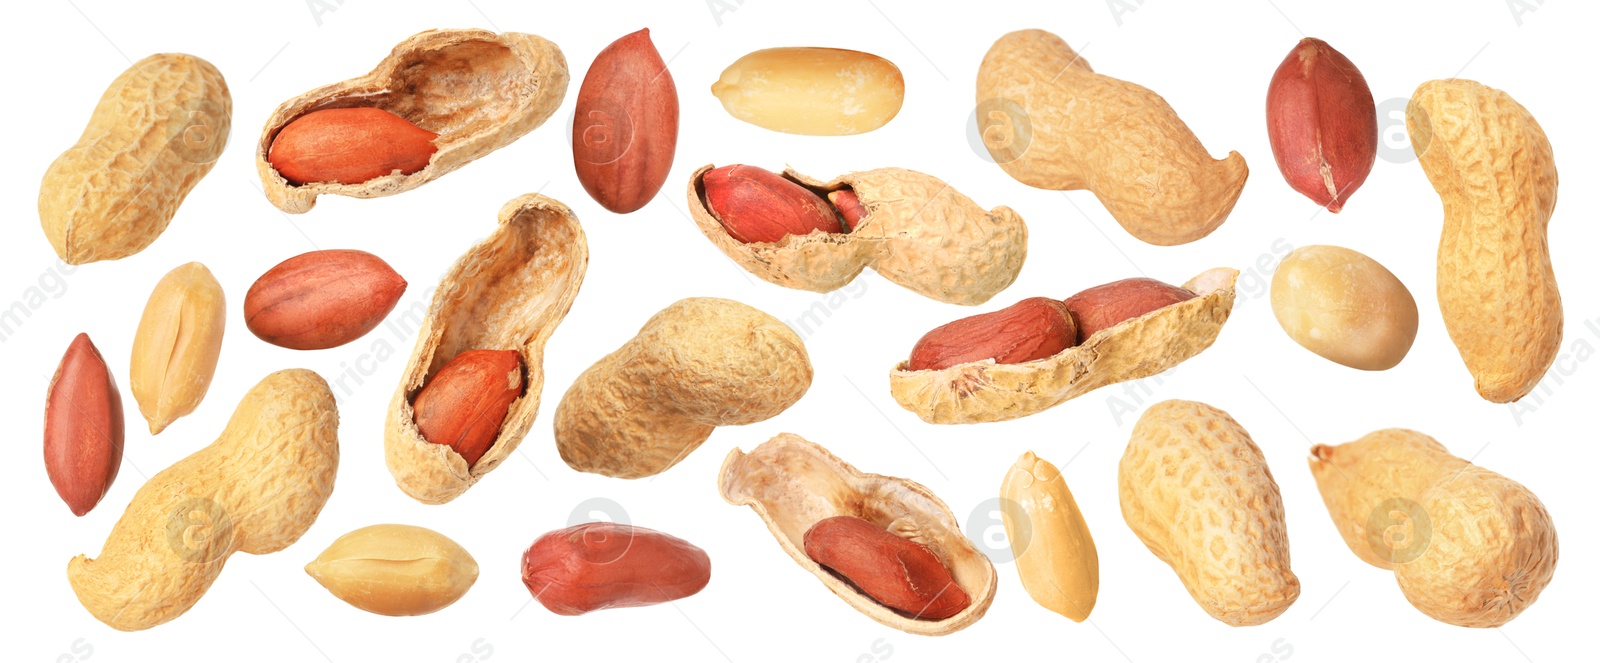 Image of Many different peanuts isolated on white, set